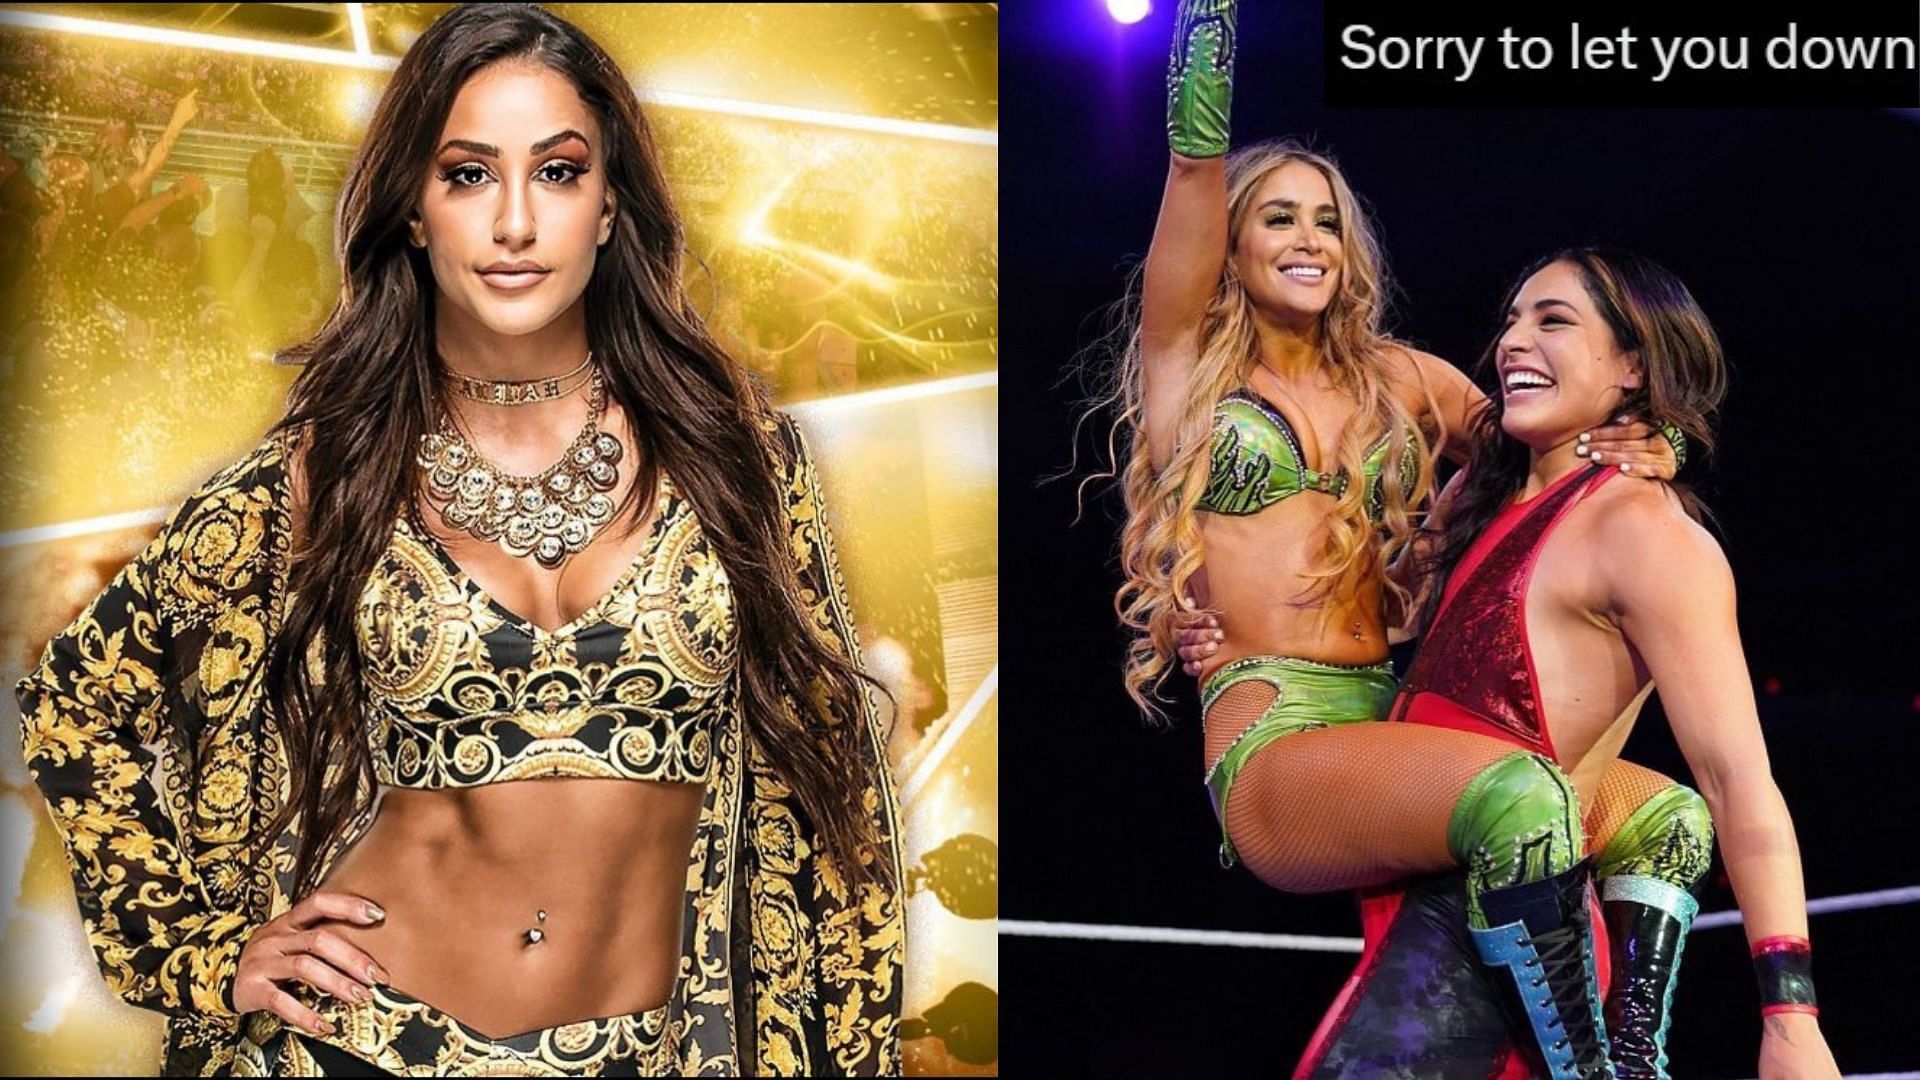 Aliyah deleted tweets on WWE What did Aliyah say in a nowdeleted